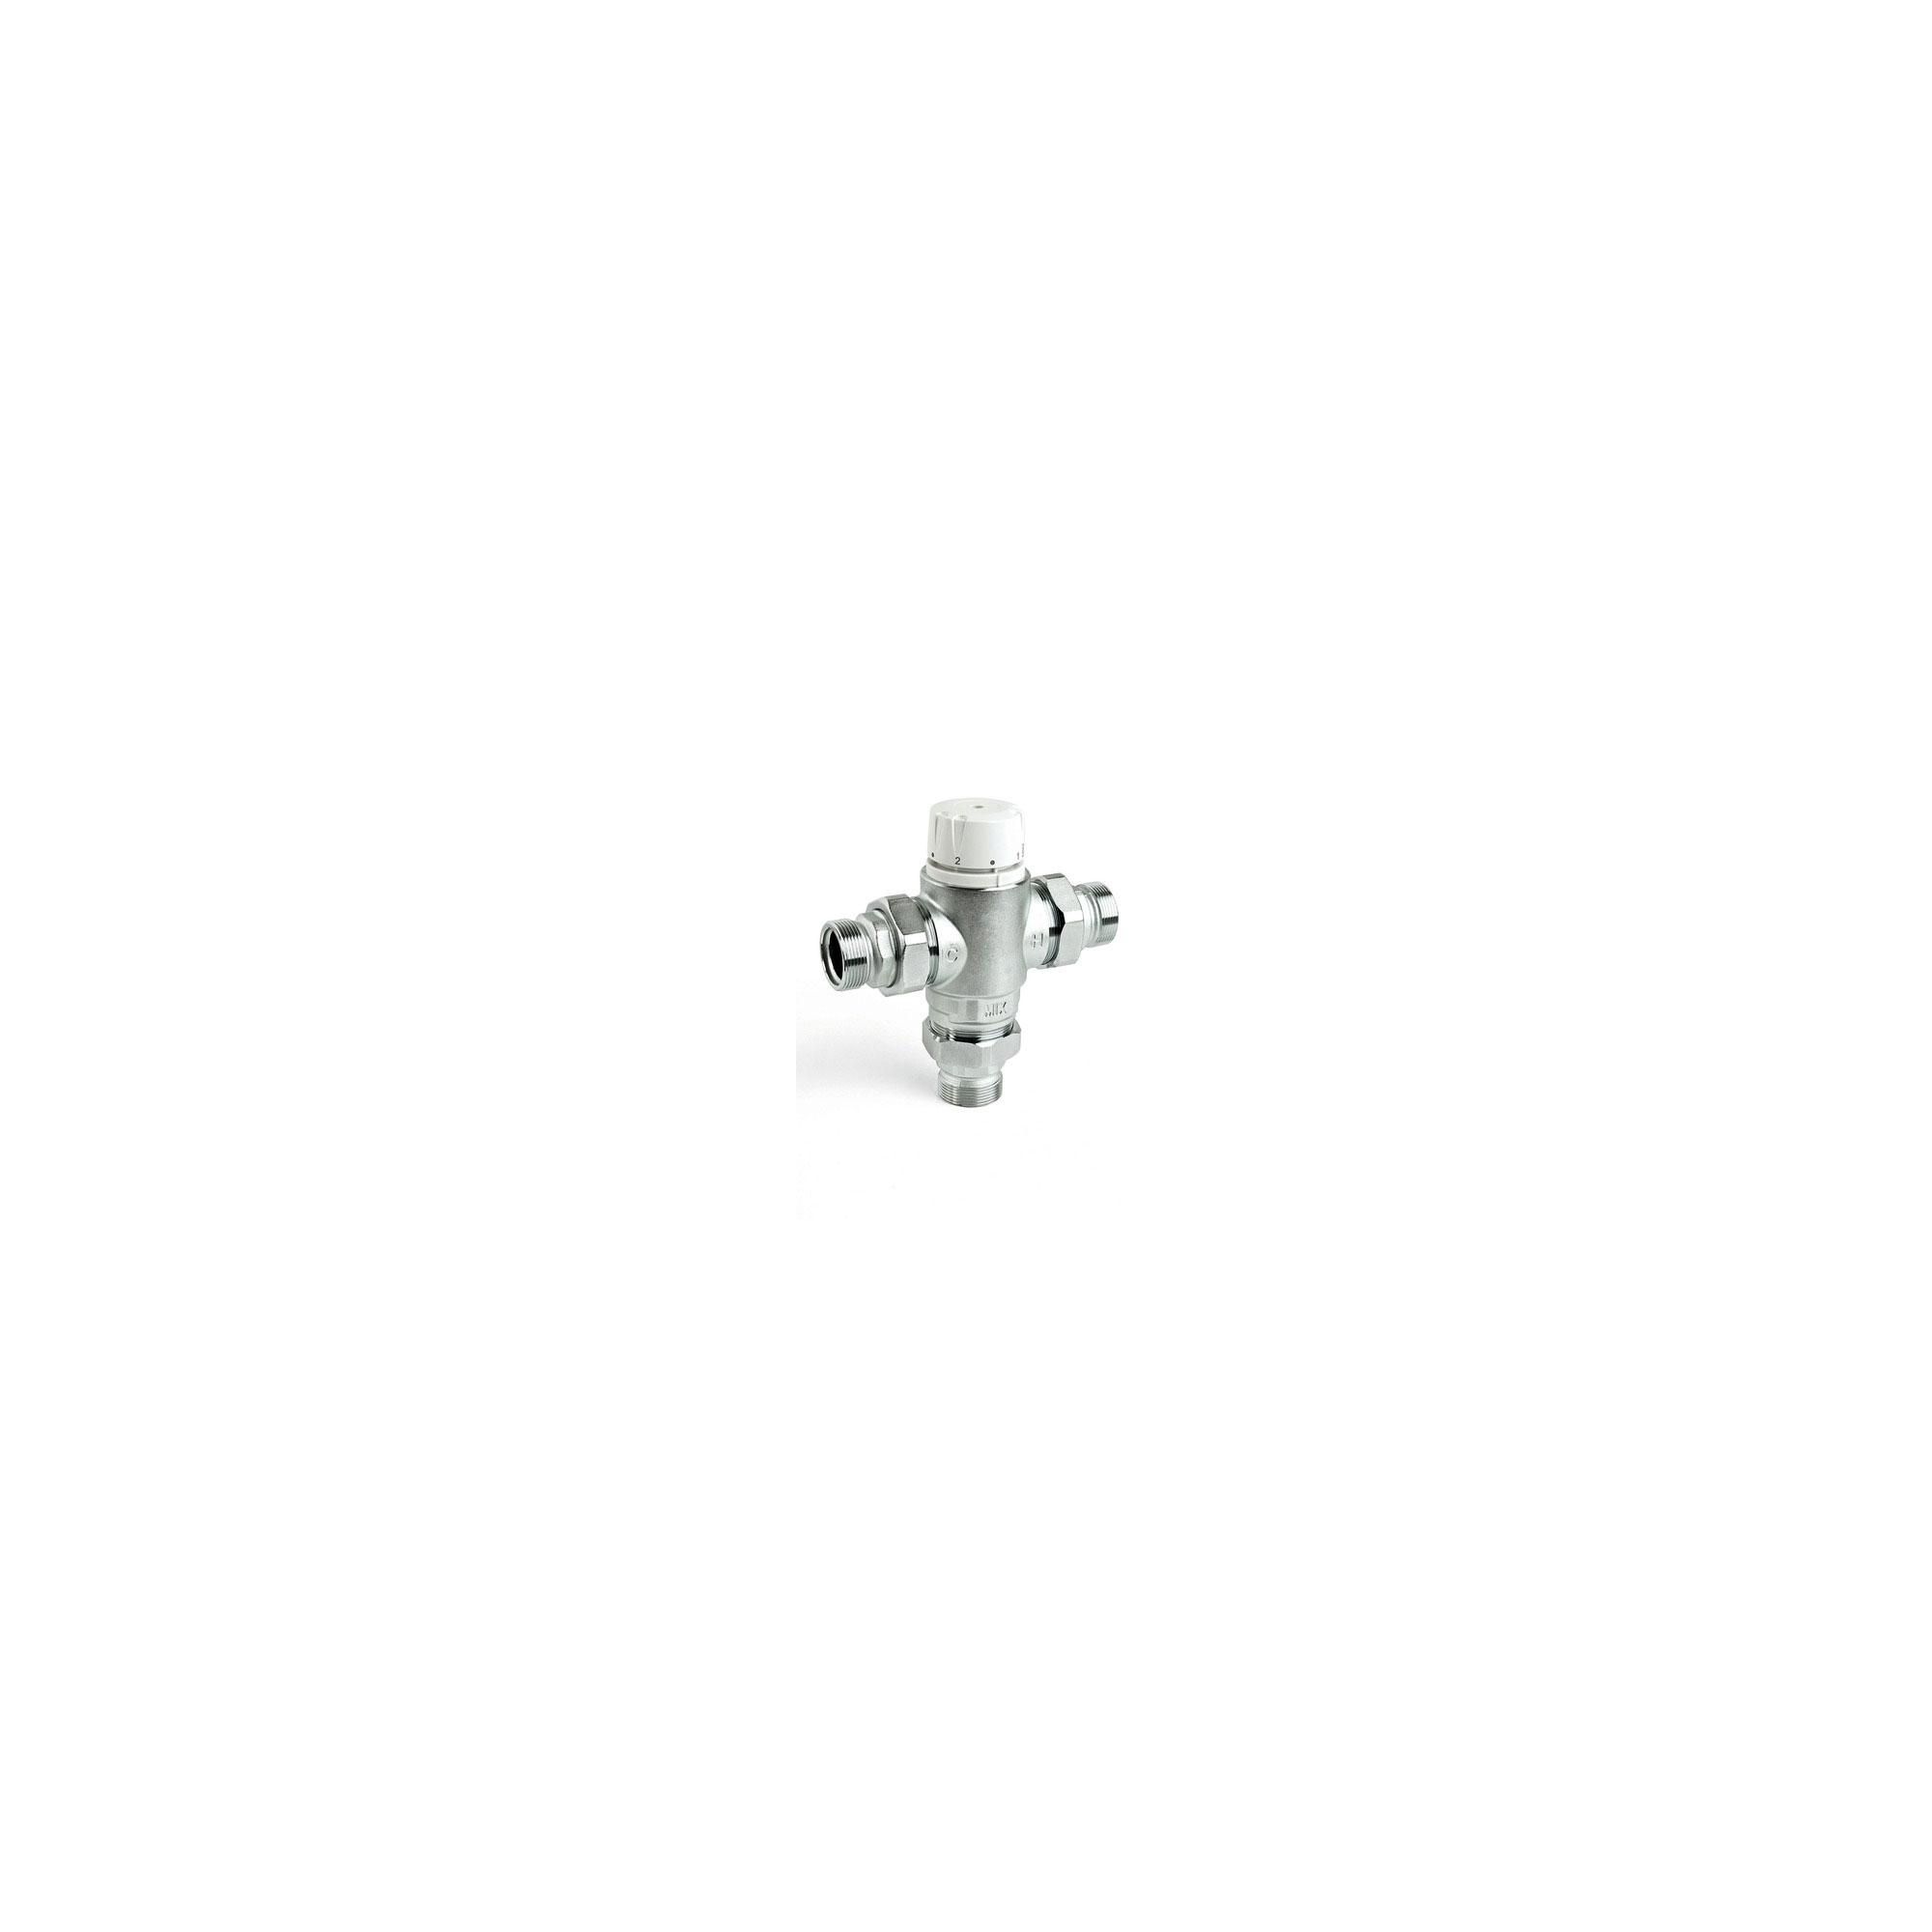 Intamix Pro Thermostatic Mixing Valve 1 1/2 with Screwed Iron at Tesco Direct